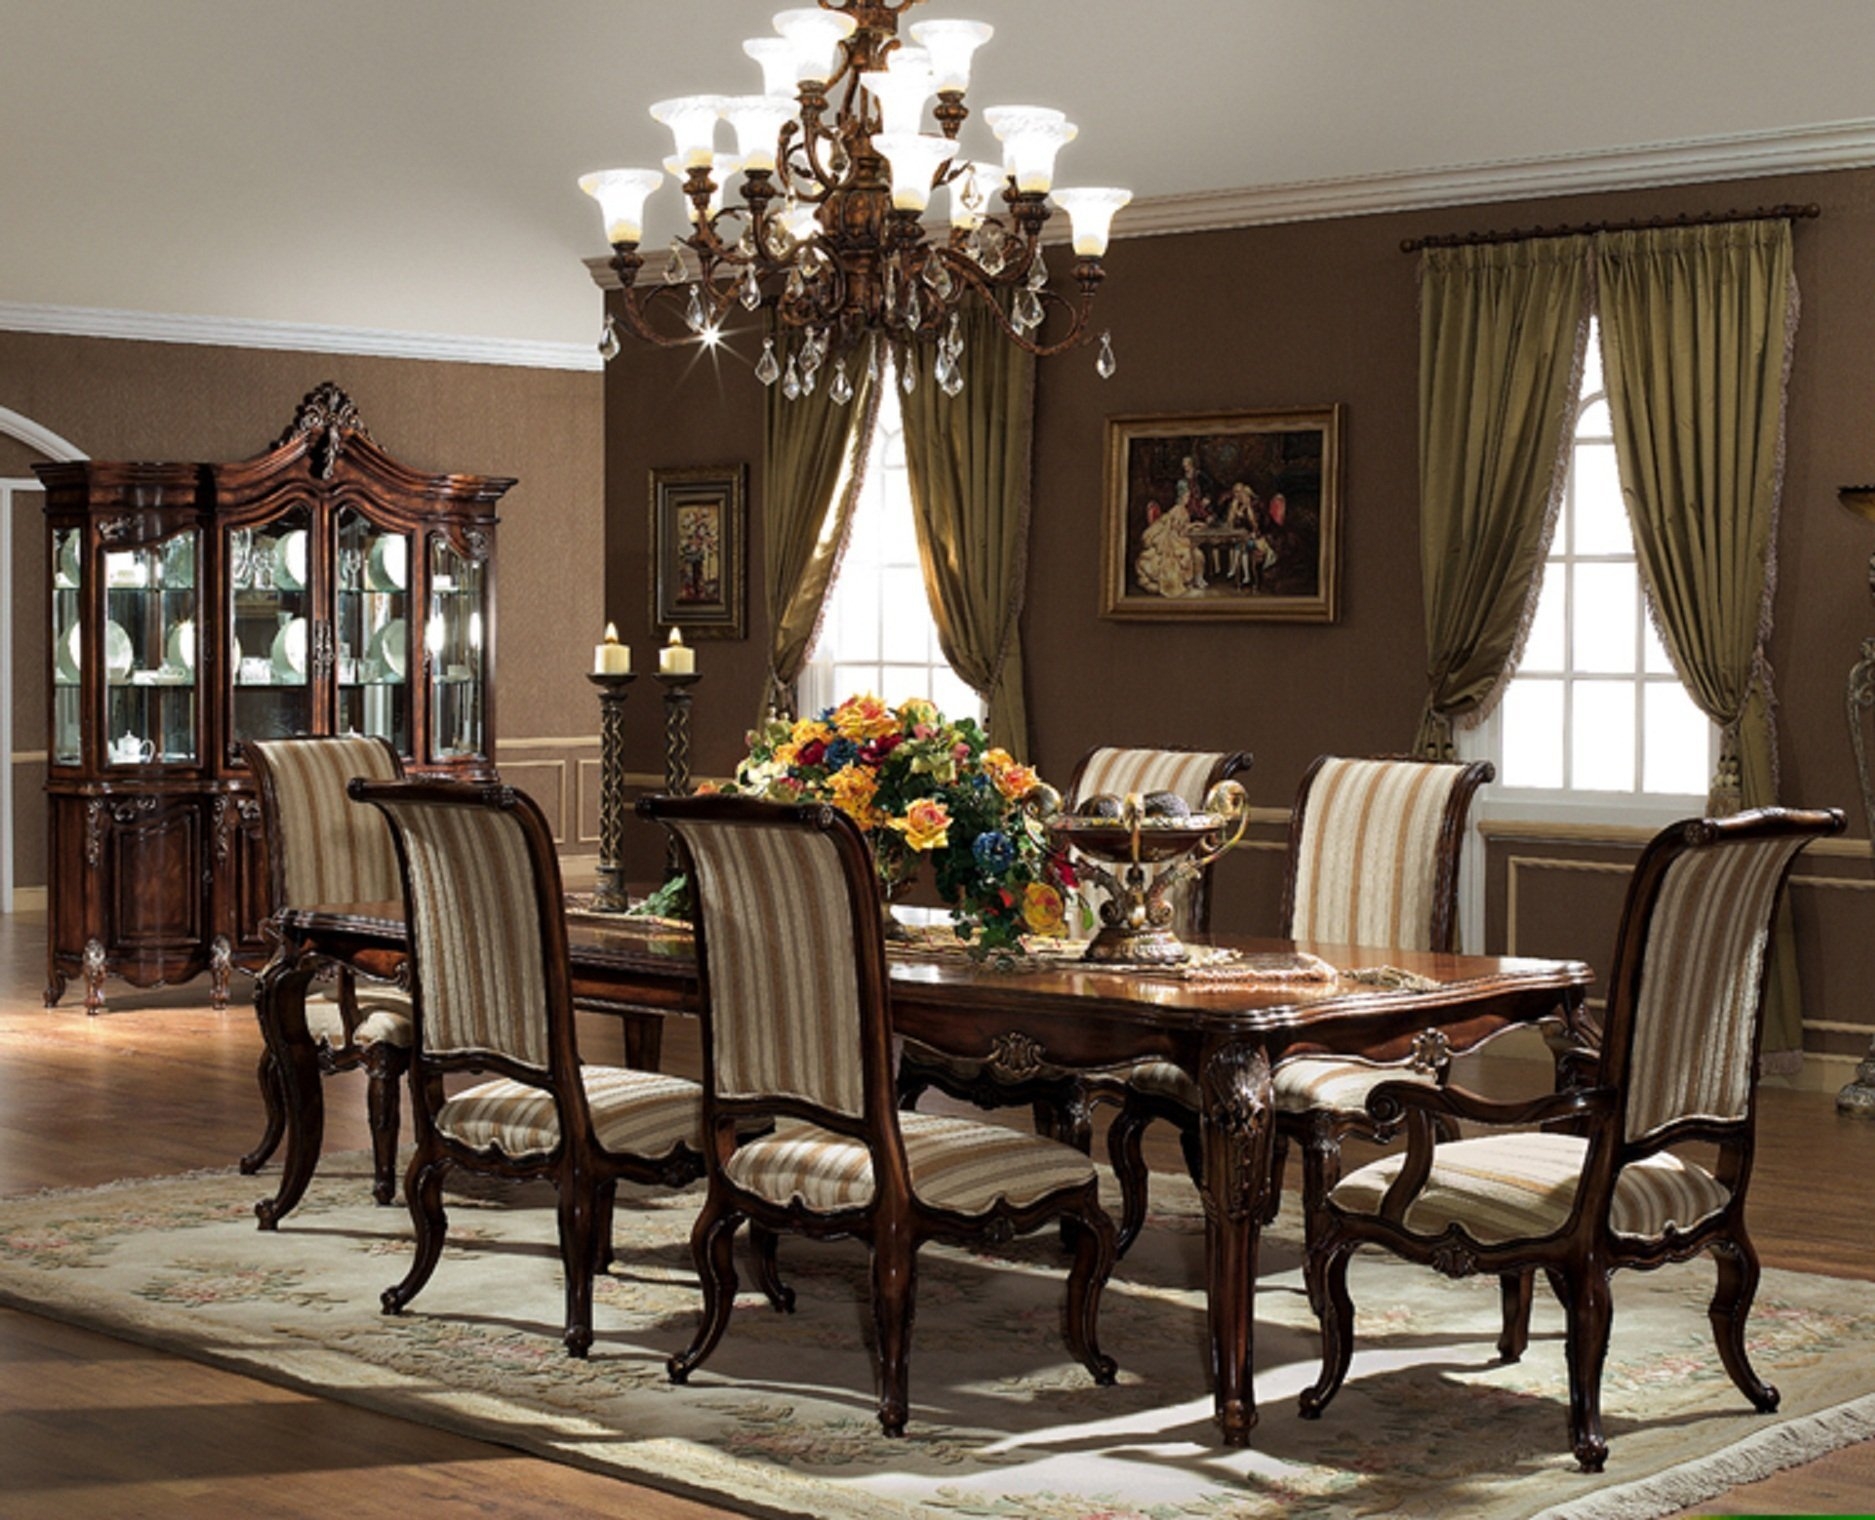 Formal Dining Room Sets Visualhunt, Formal Dining Room Sets For Small Spaces